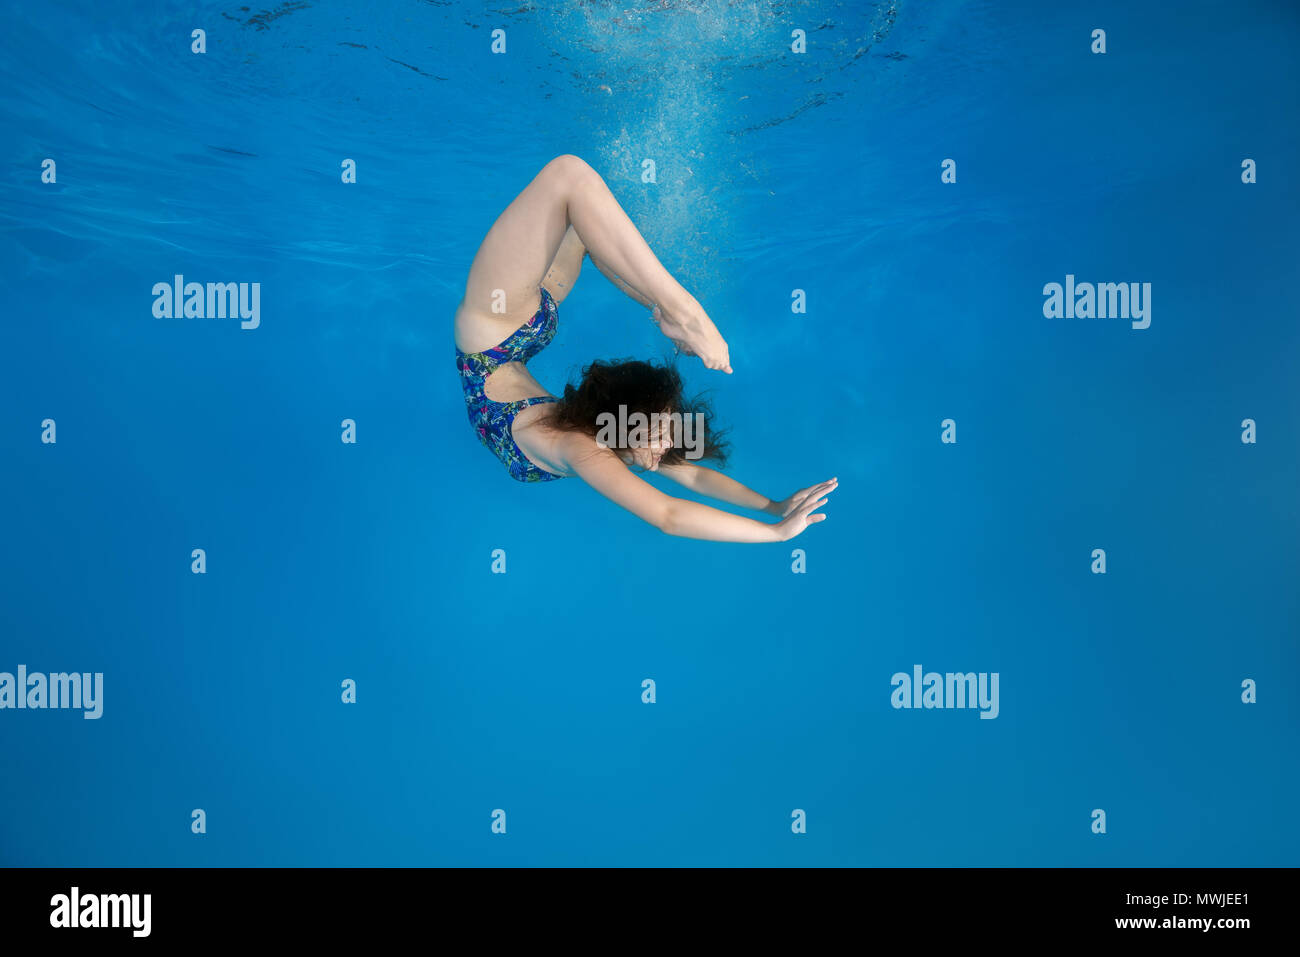 Girl curled into a wheel under water in the pool. Underwater acrobatics Stock Photo